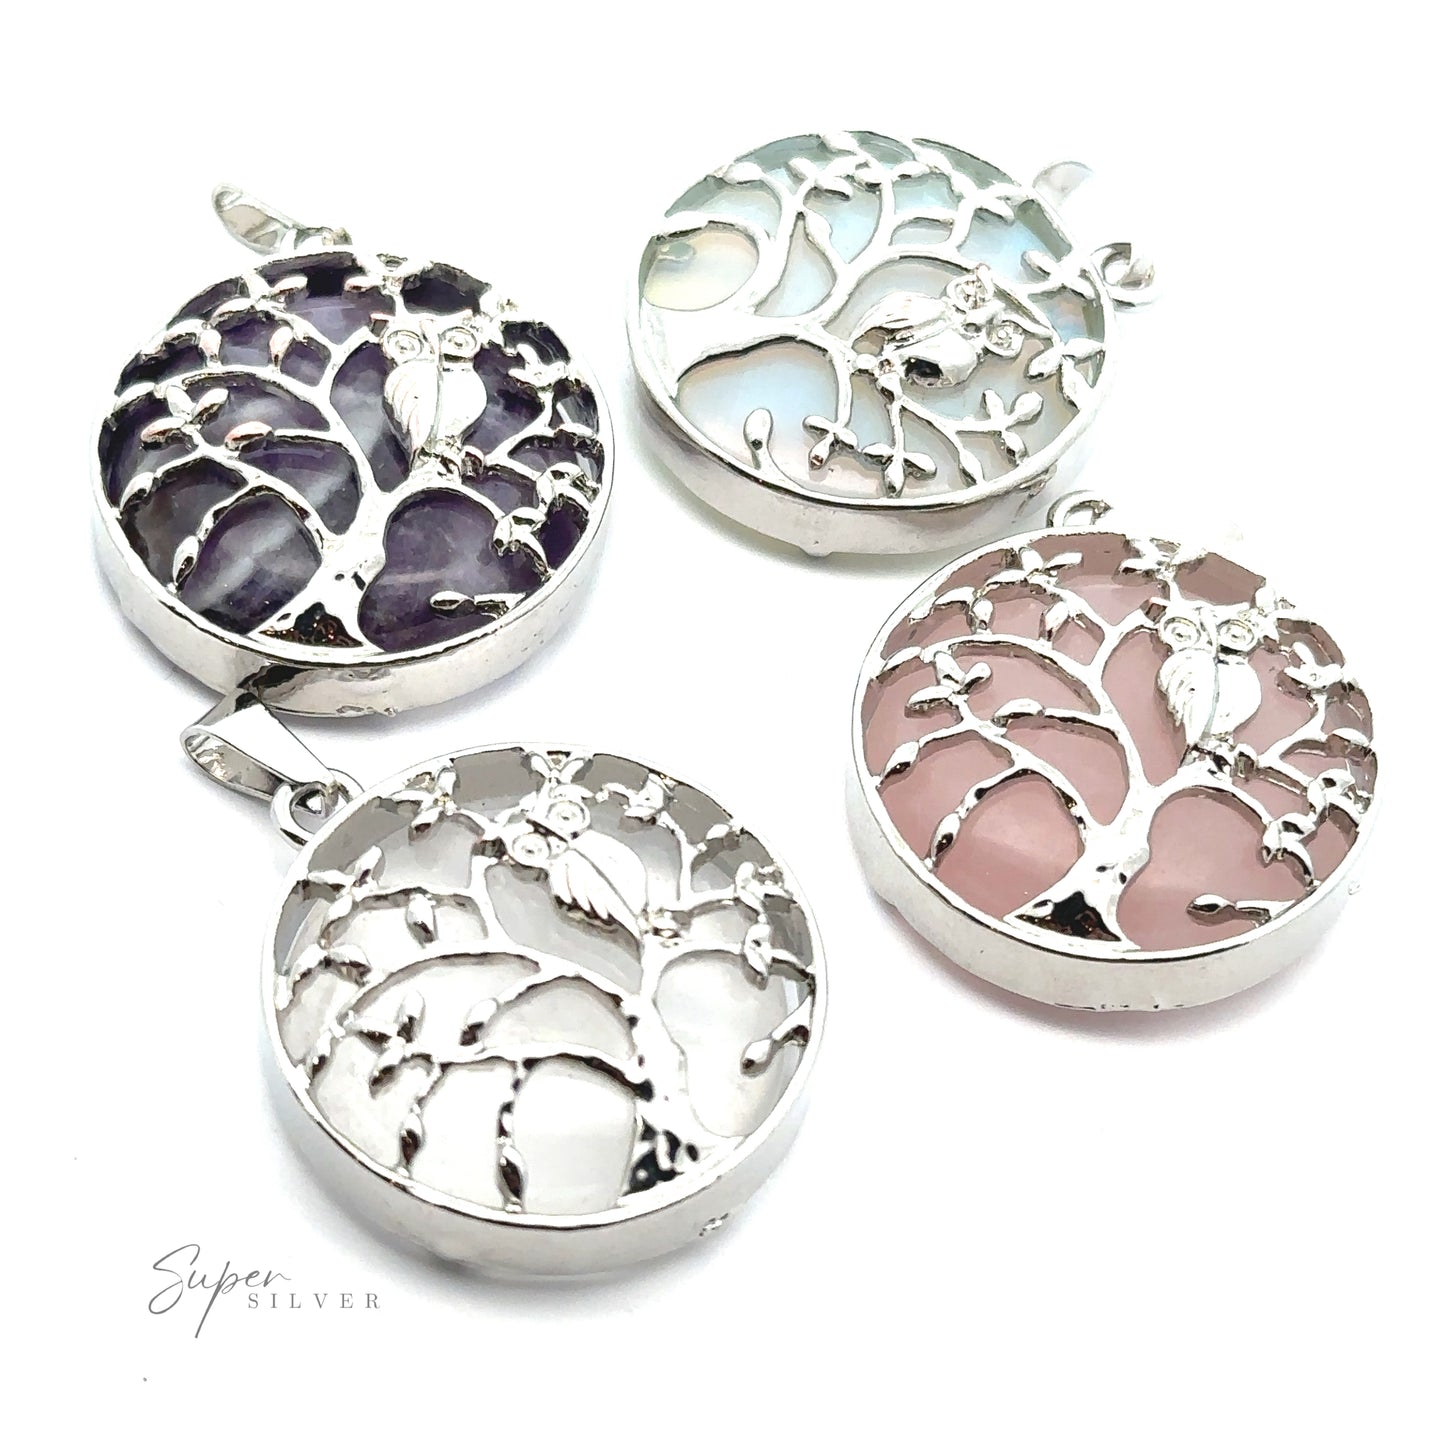 Four Owl and Tree Pendants feature intricate designs with owls perched in their branches. Crafted from mixed metals, each pendant boasts a different colored stone background: Amethyst purple, blue-green, white, and pink.